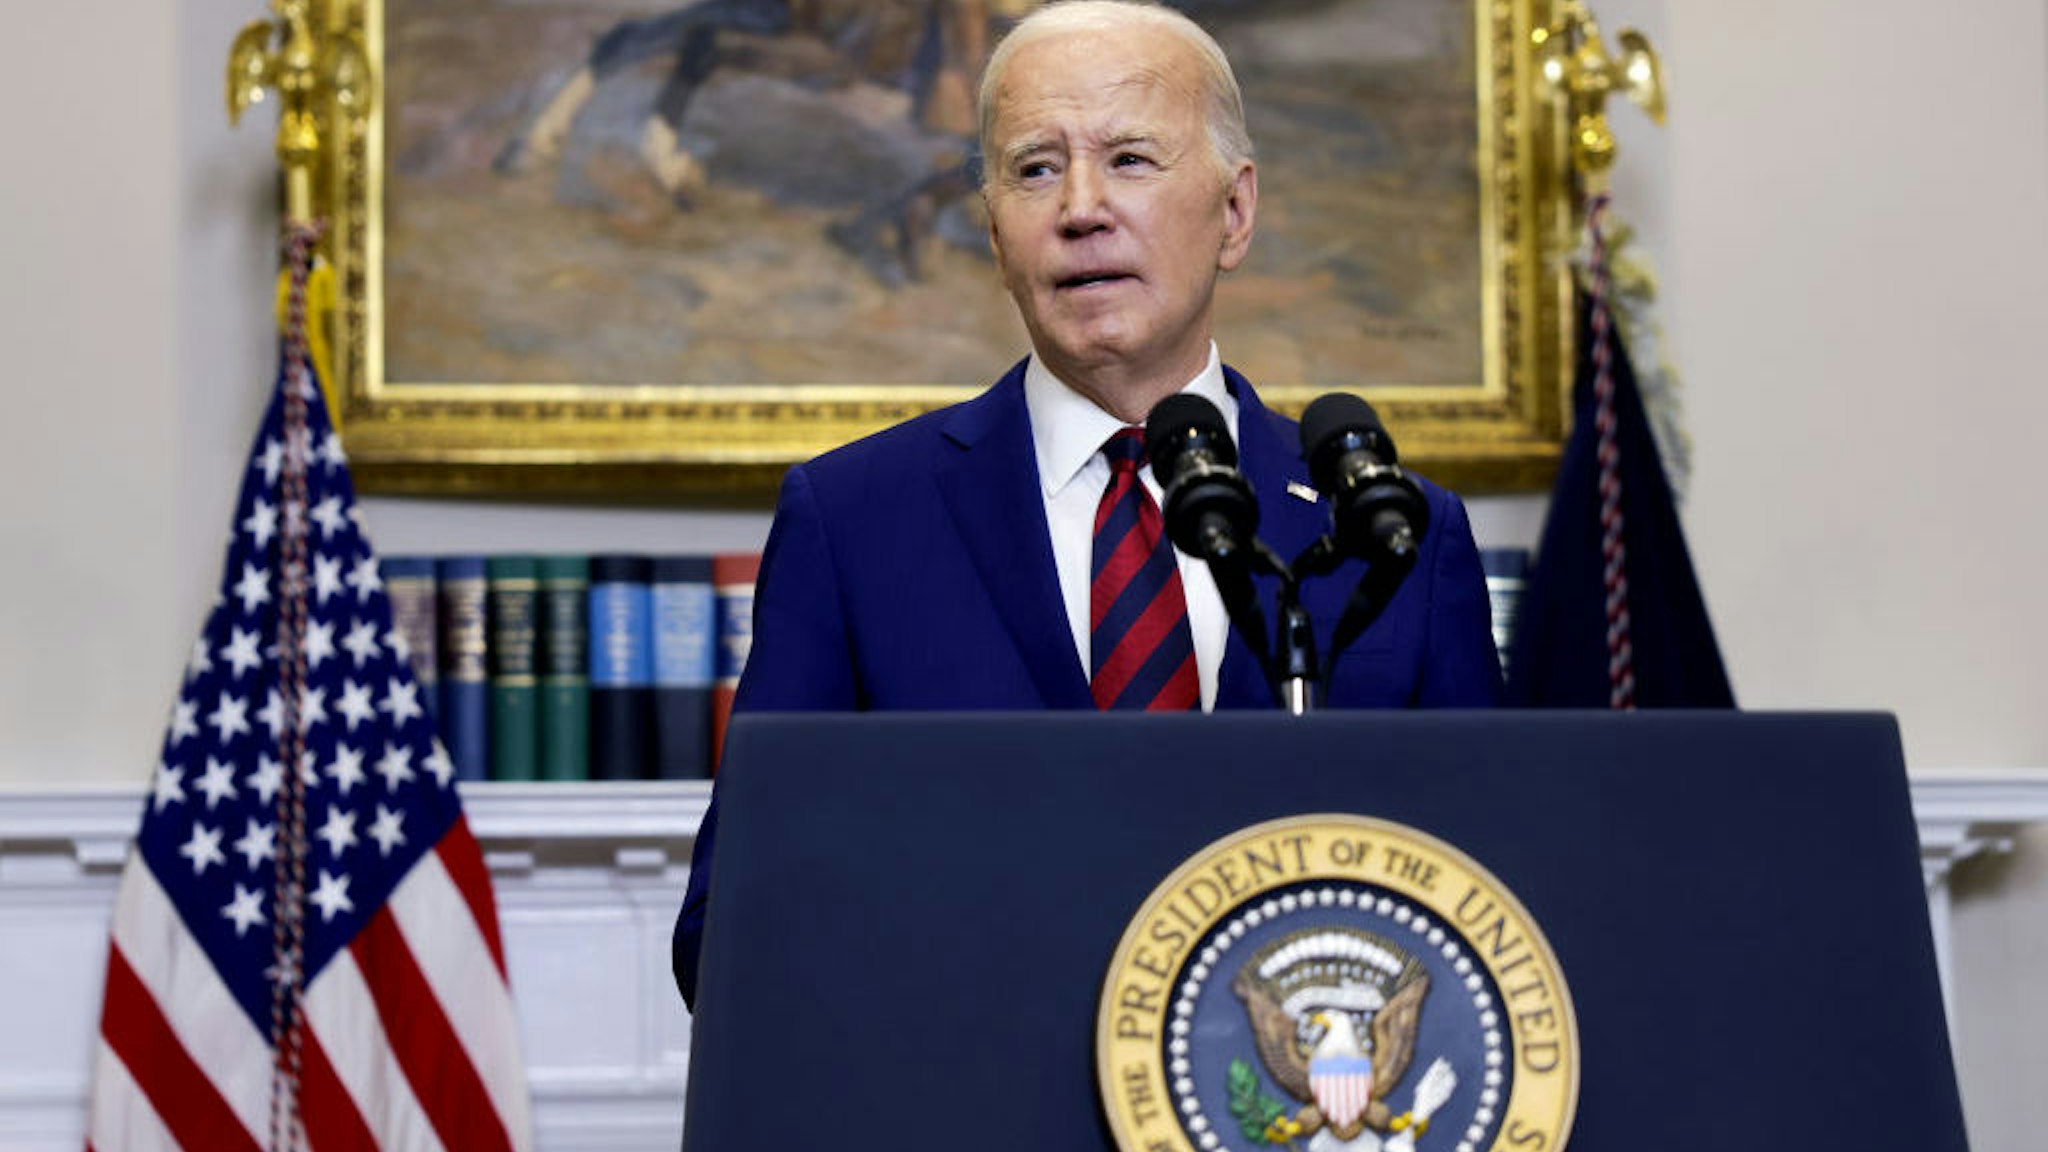 US President Joe Biden speaks on the collapse of the Francis Scott Key Bridge in the Roosevelt Room of the White House in Washington, DC, US, on Tuesday, March 26, 2024. The Francis Scott Key Bridge collapsed early Tuesday morning after being struck by a container ship, causing vehicles to plunge into the water and halting shipping traffic at one of the most important ports on the US East Coast. Photographer: Samuel Corum/Sipa/Bloomberg